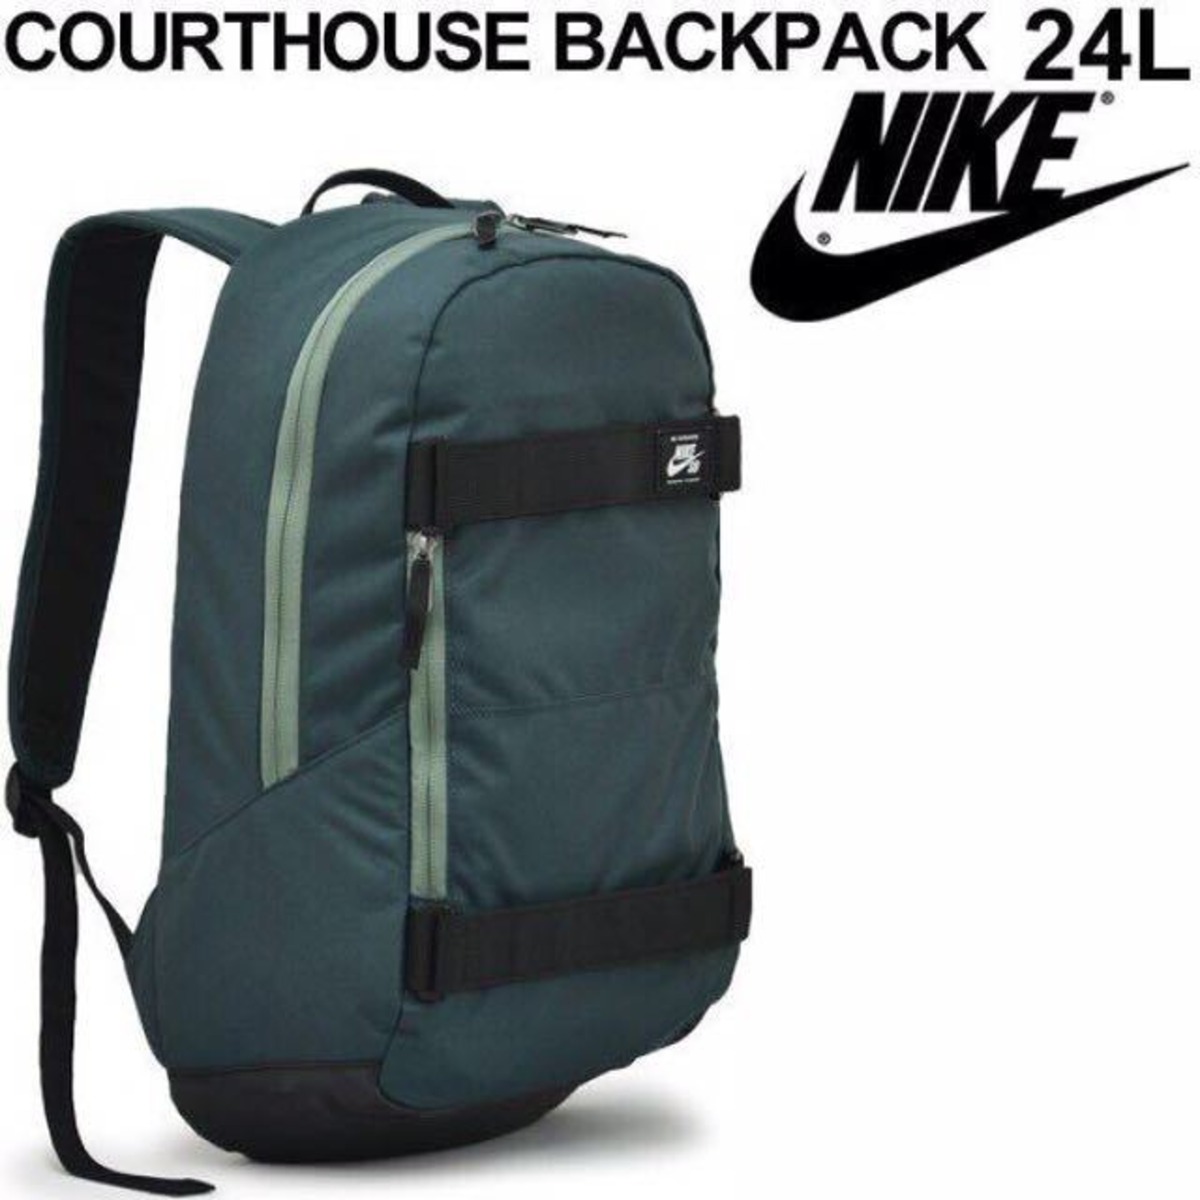 NIKE SB COURTHOUSE BACKPACK 24L | BS Store